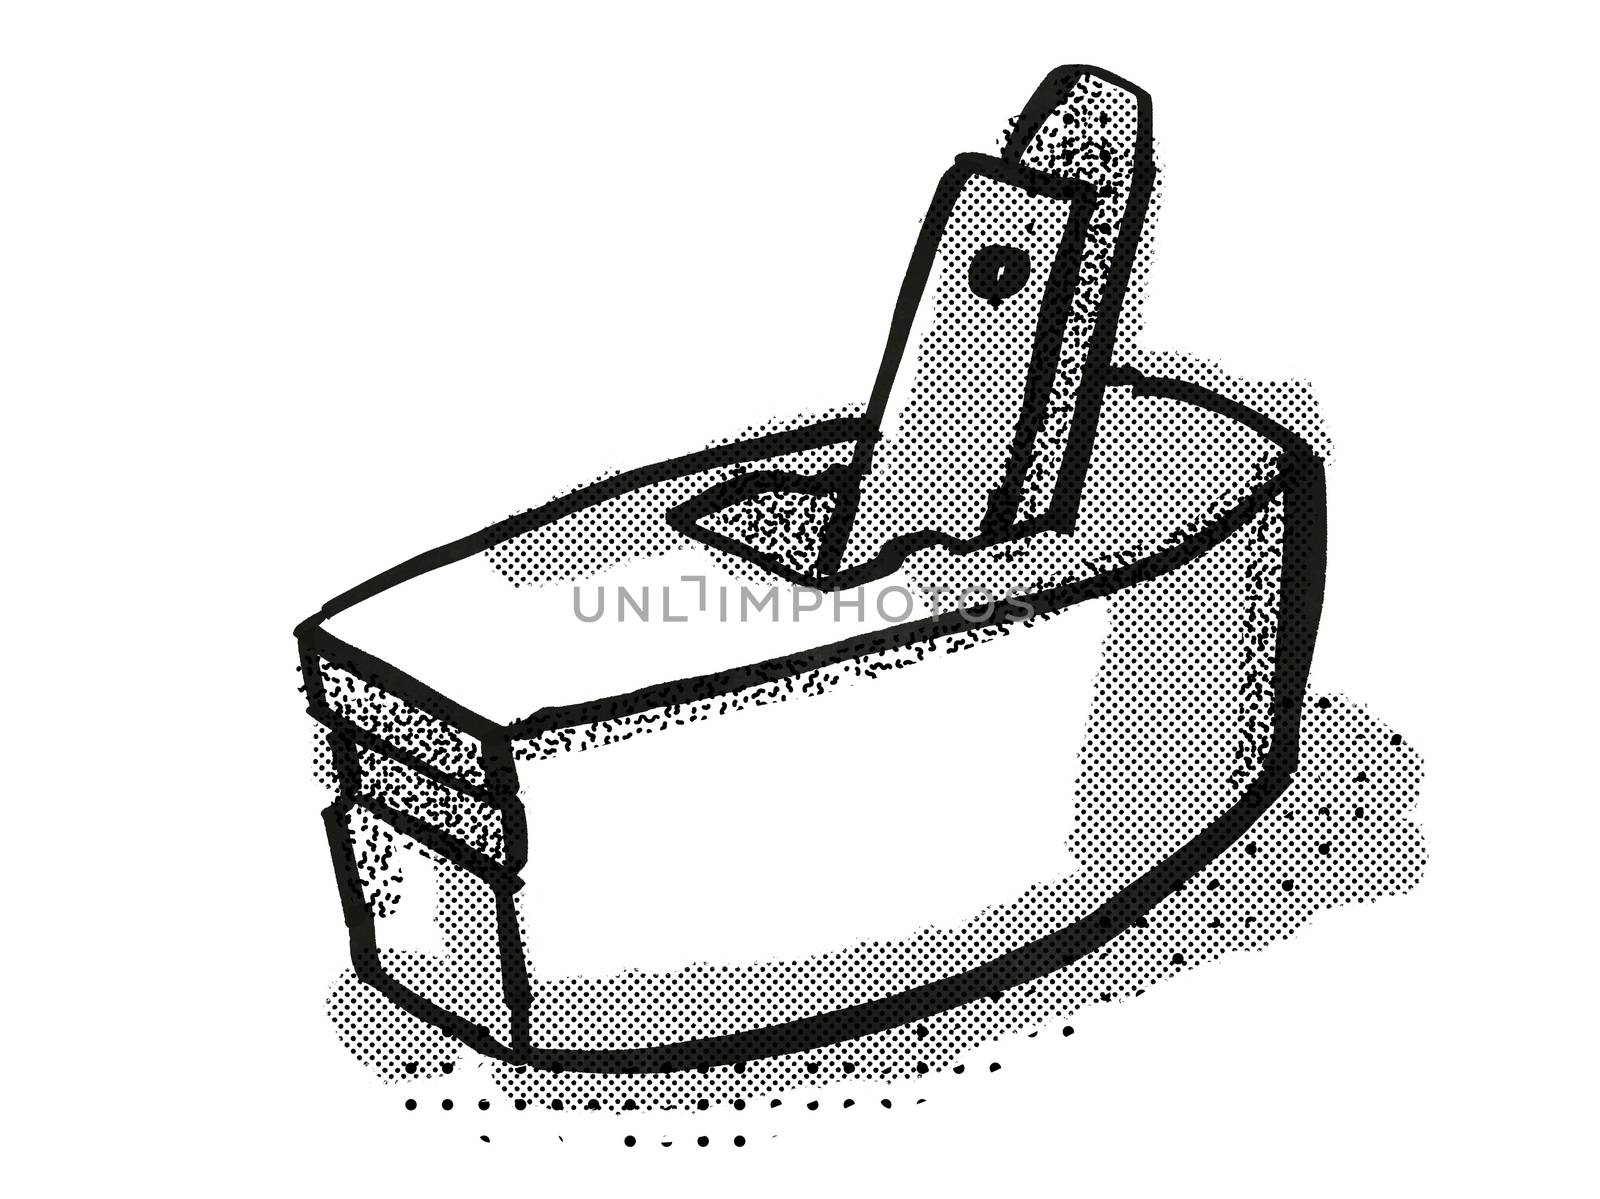 Retro cartoon style drawing of a wood smoothing plane , a woodworking hand tool  on isolated white background done in black and white